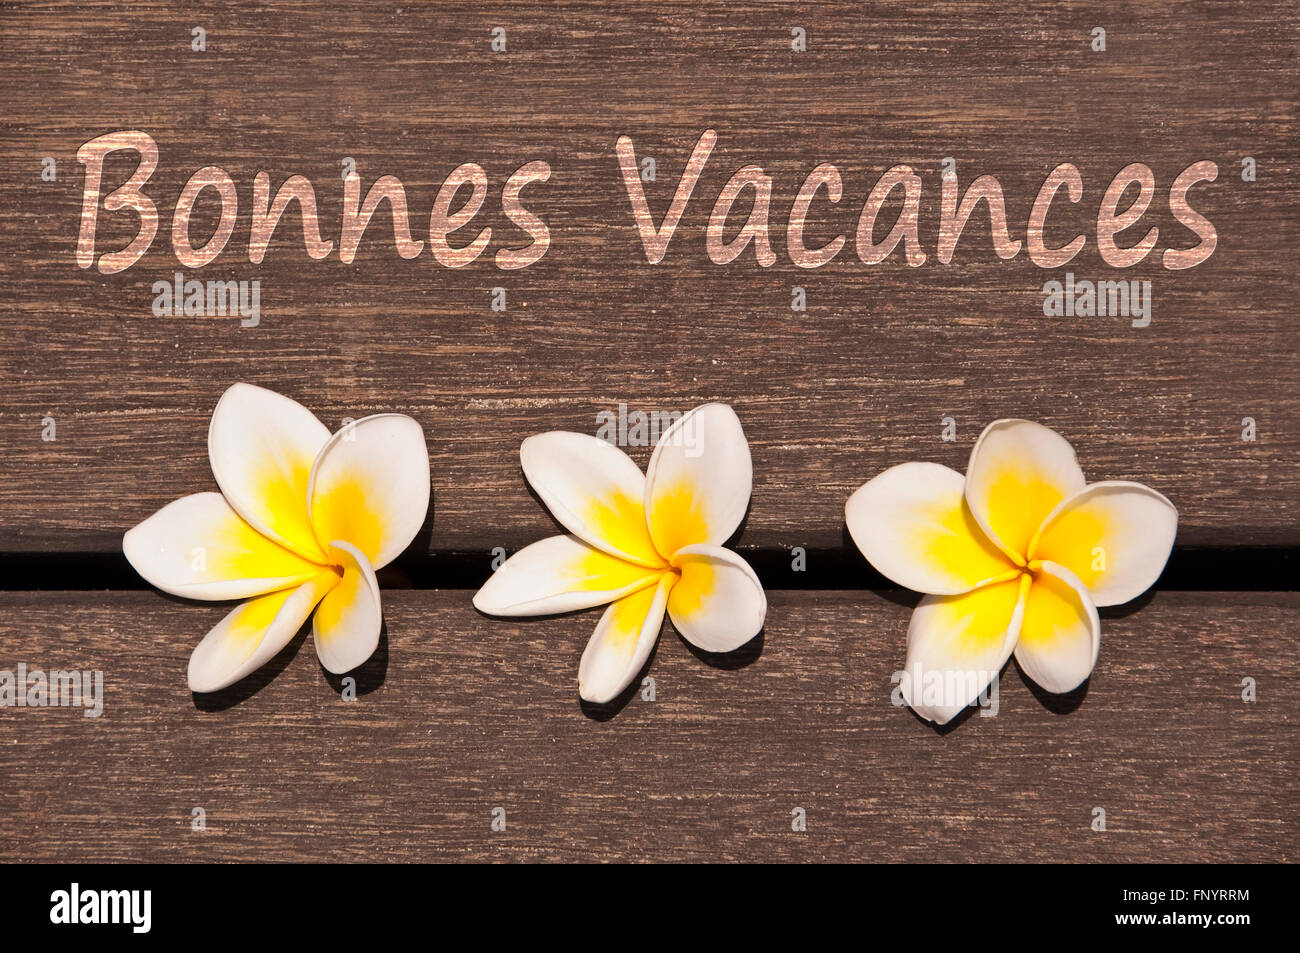 Text Bonnes vacances (meaning happy summer in French) with plumeria flower on wooden floor background Stock Photo